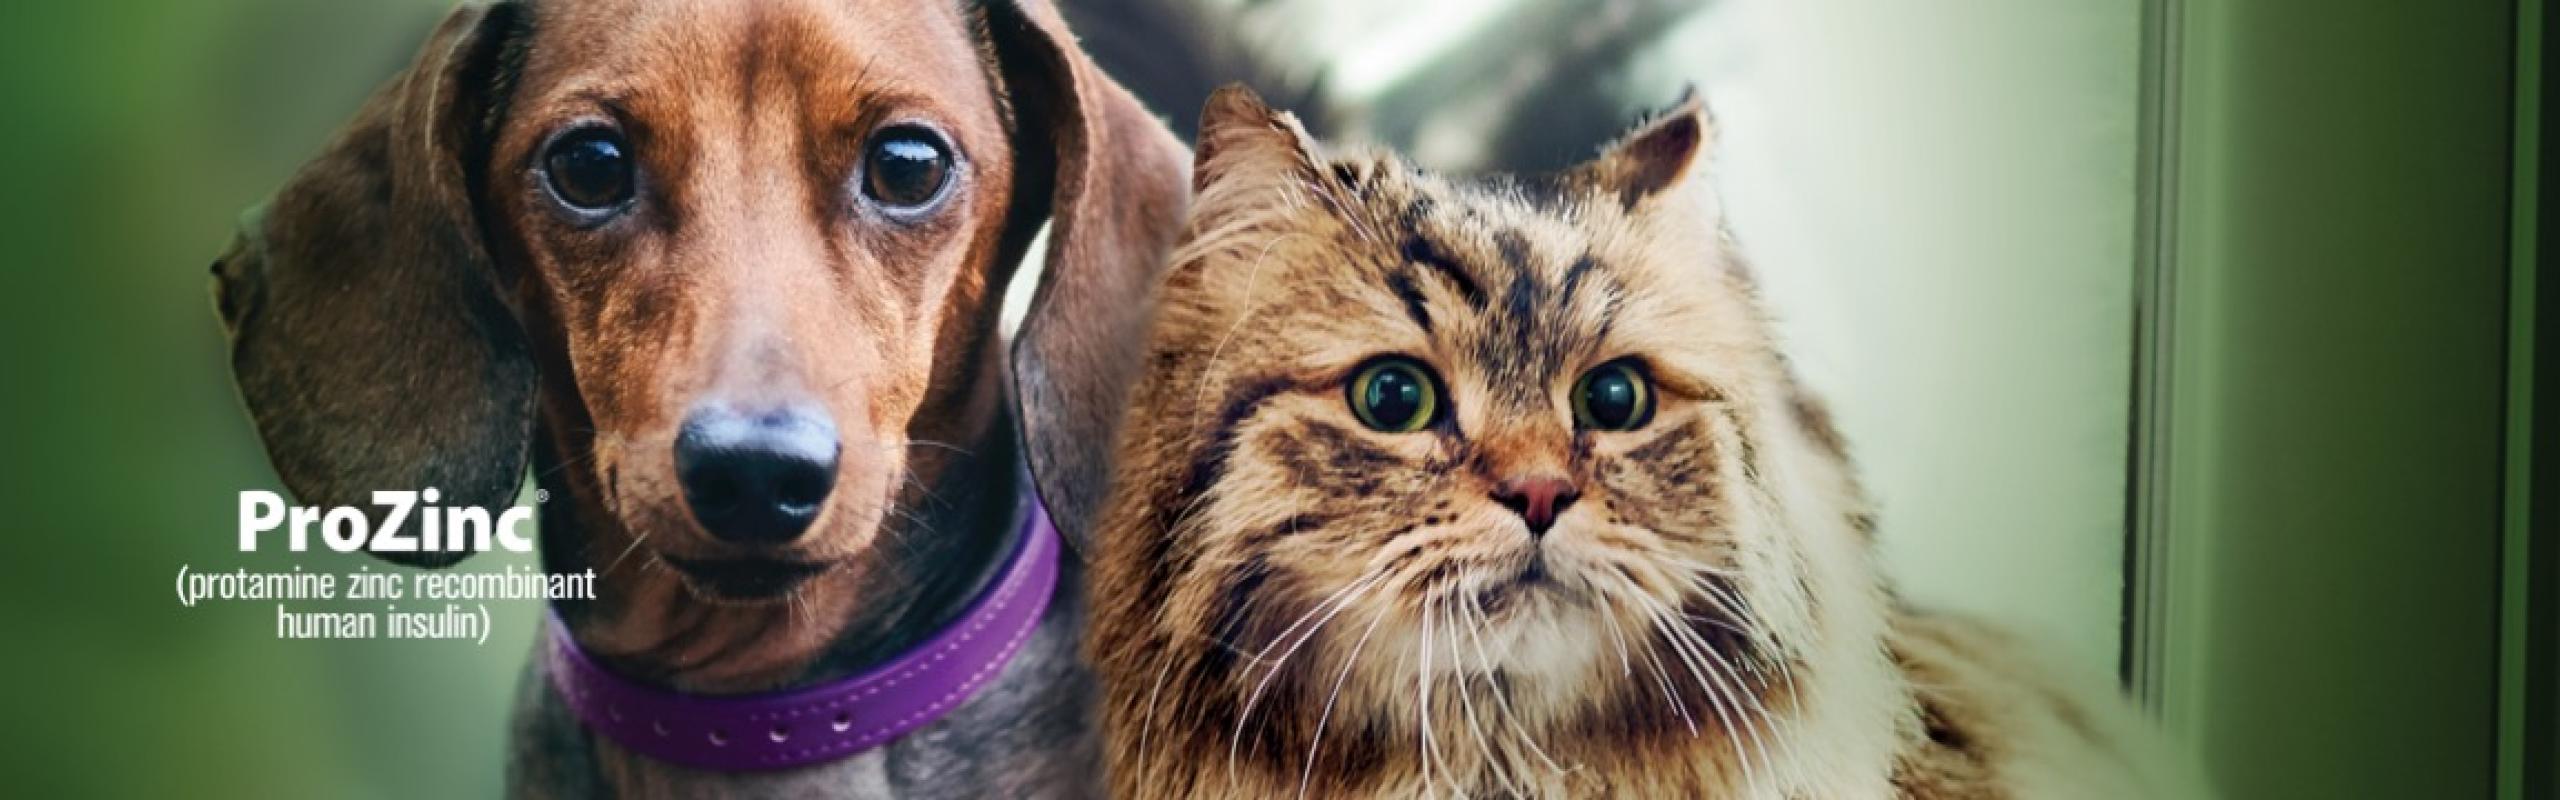 A dog and cat stand closely together